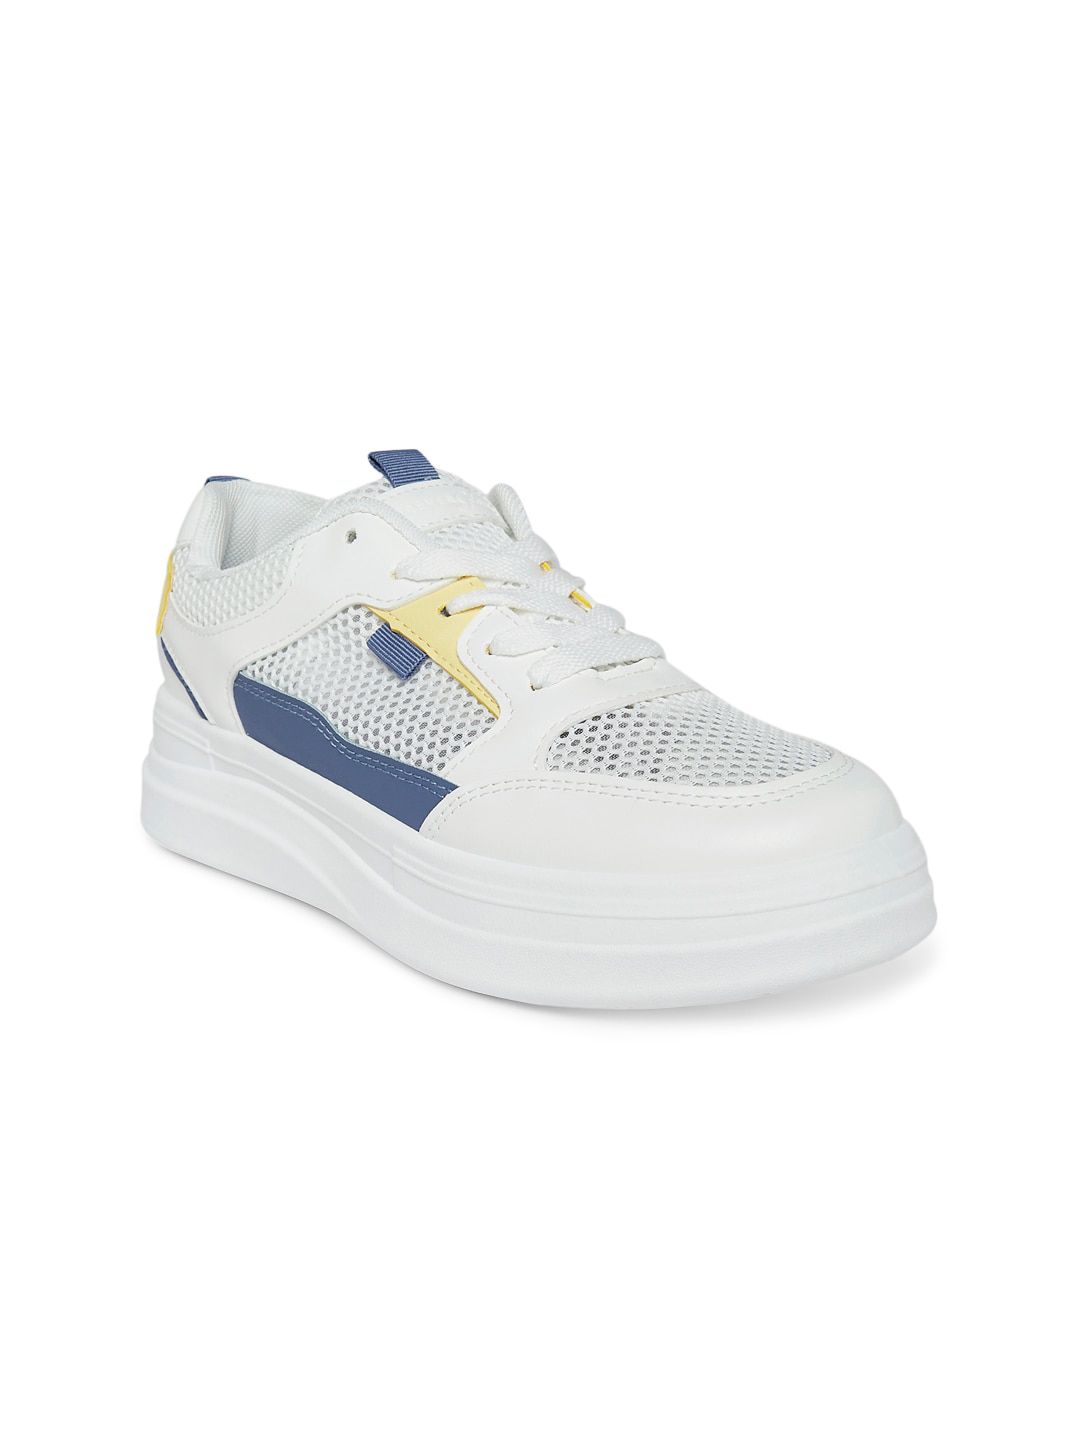 Forever Glam by Pantaloons Women White Colourblocked PU Sneakers Price in India